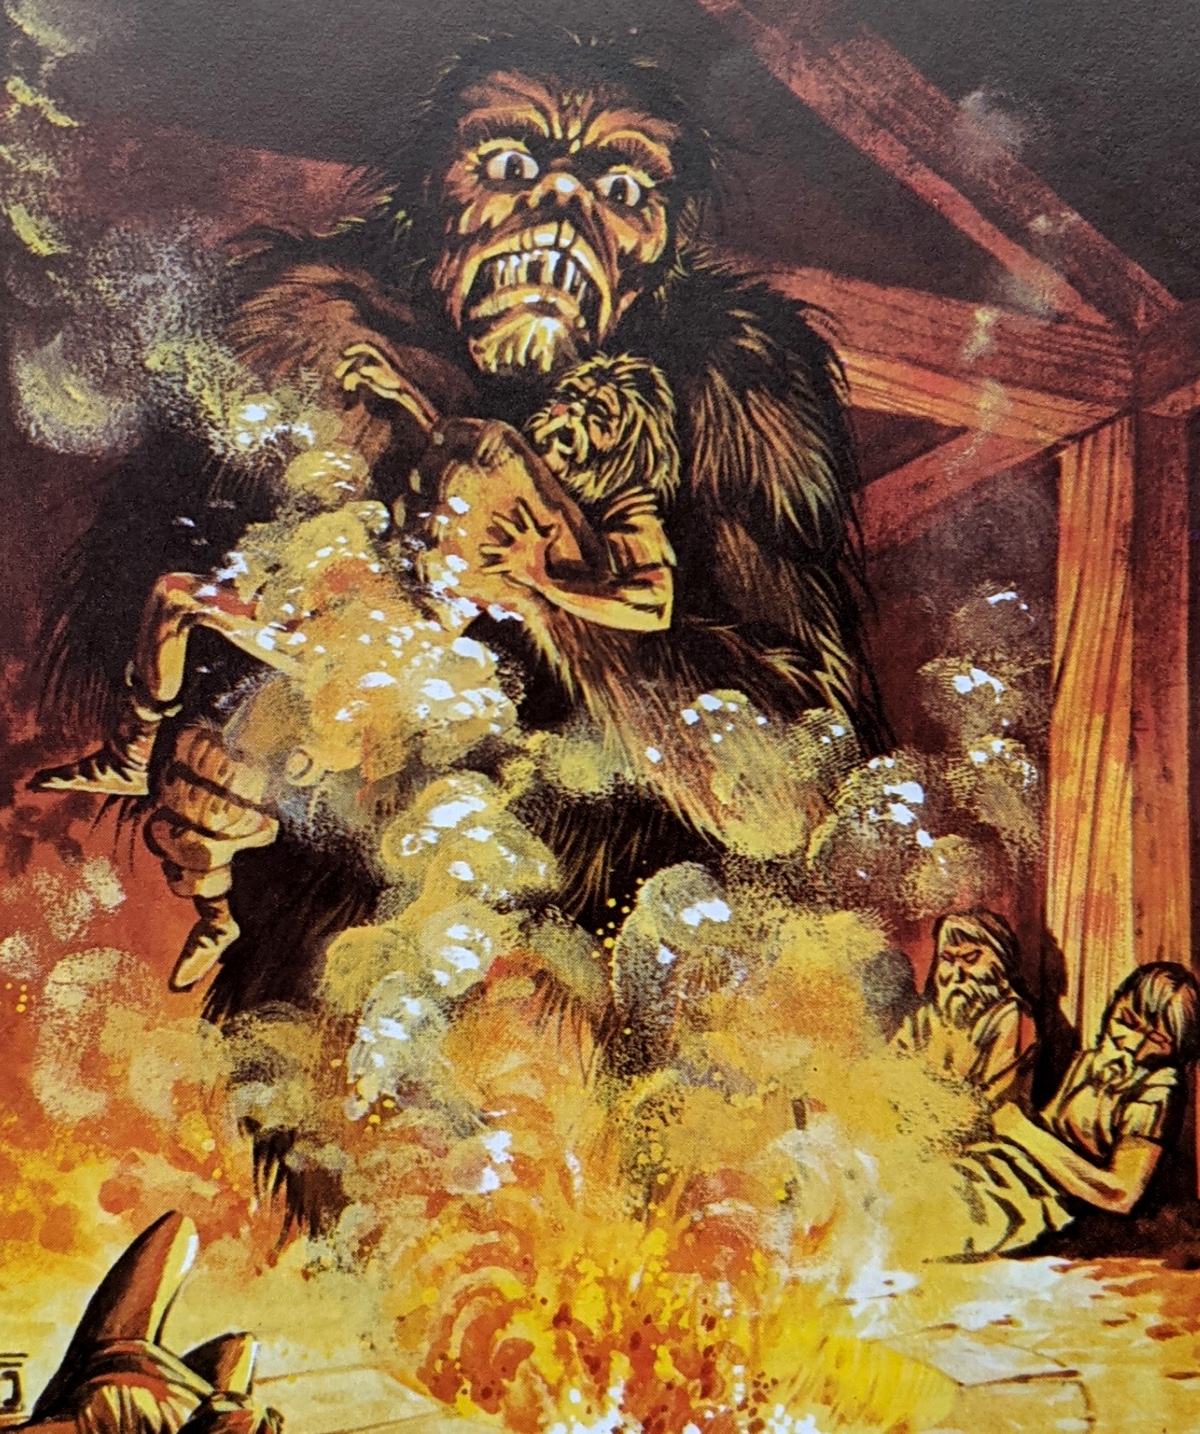 Grendel illustration from Usborne's World of the Unknown: Monsters